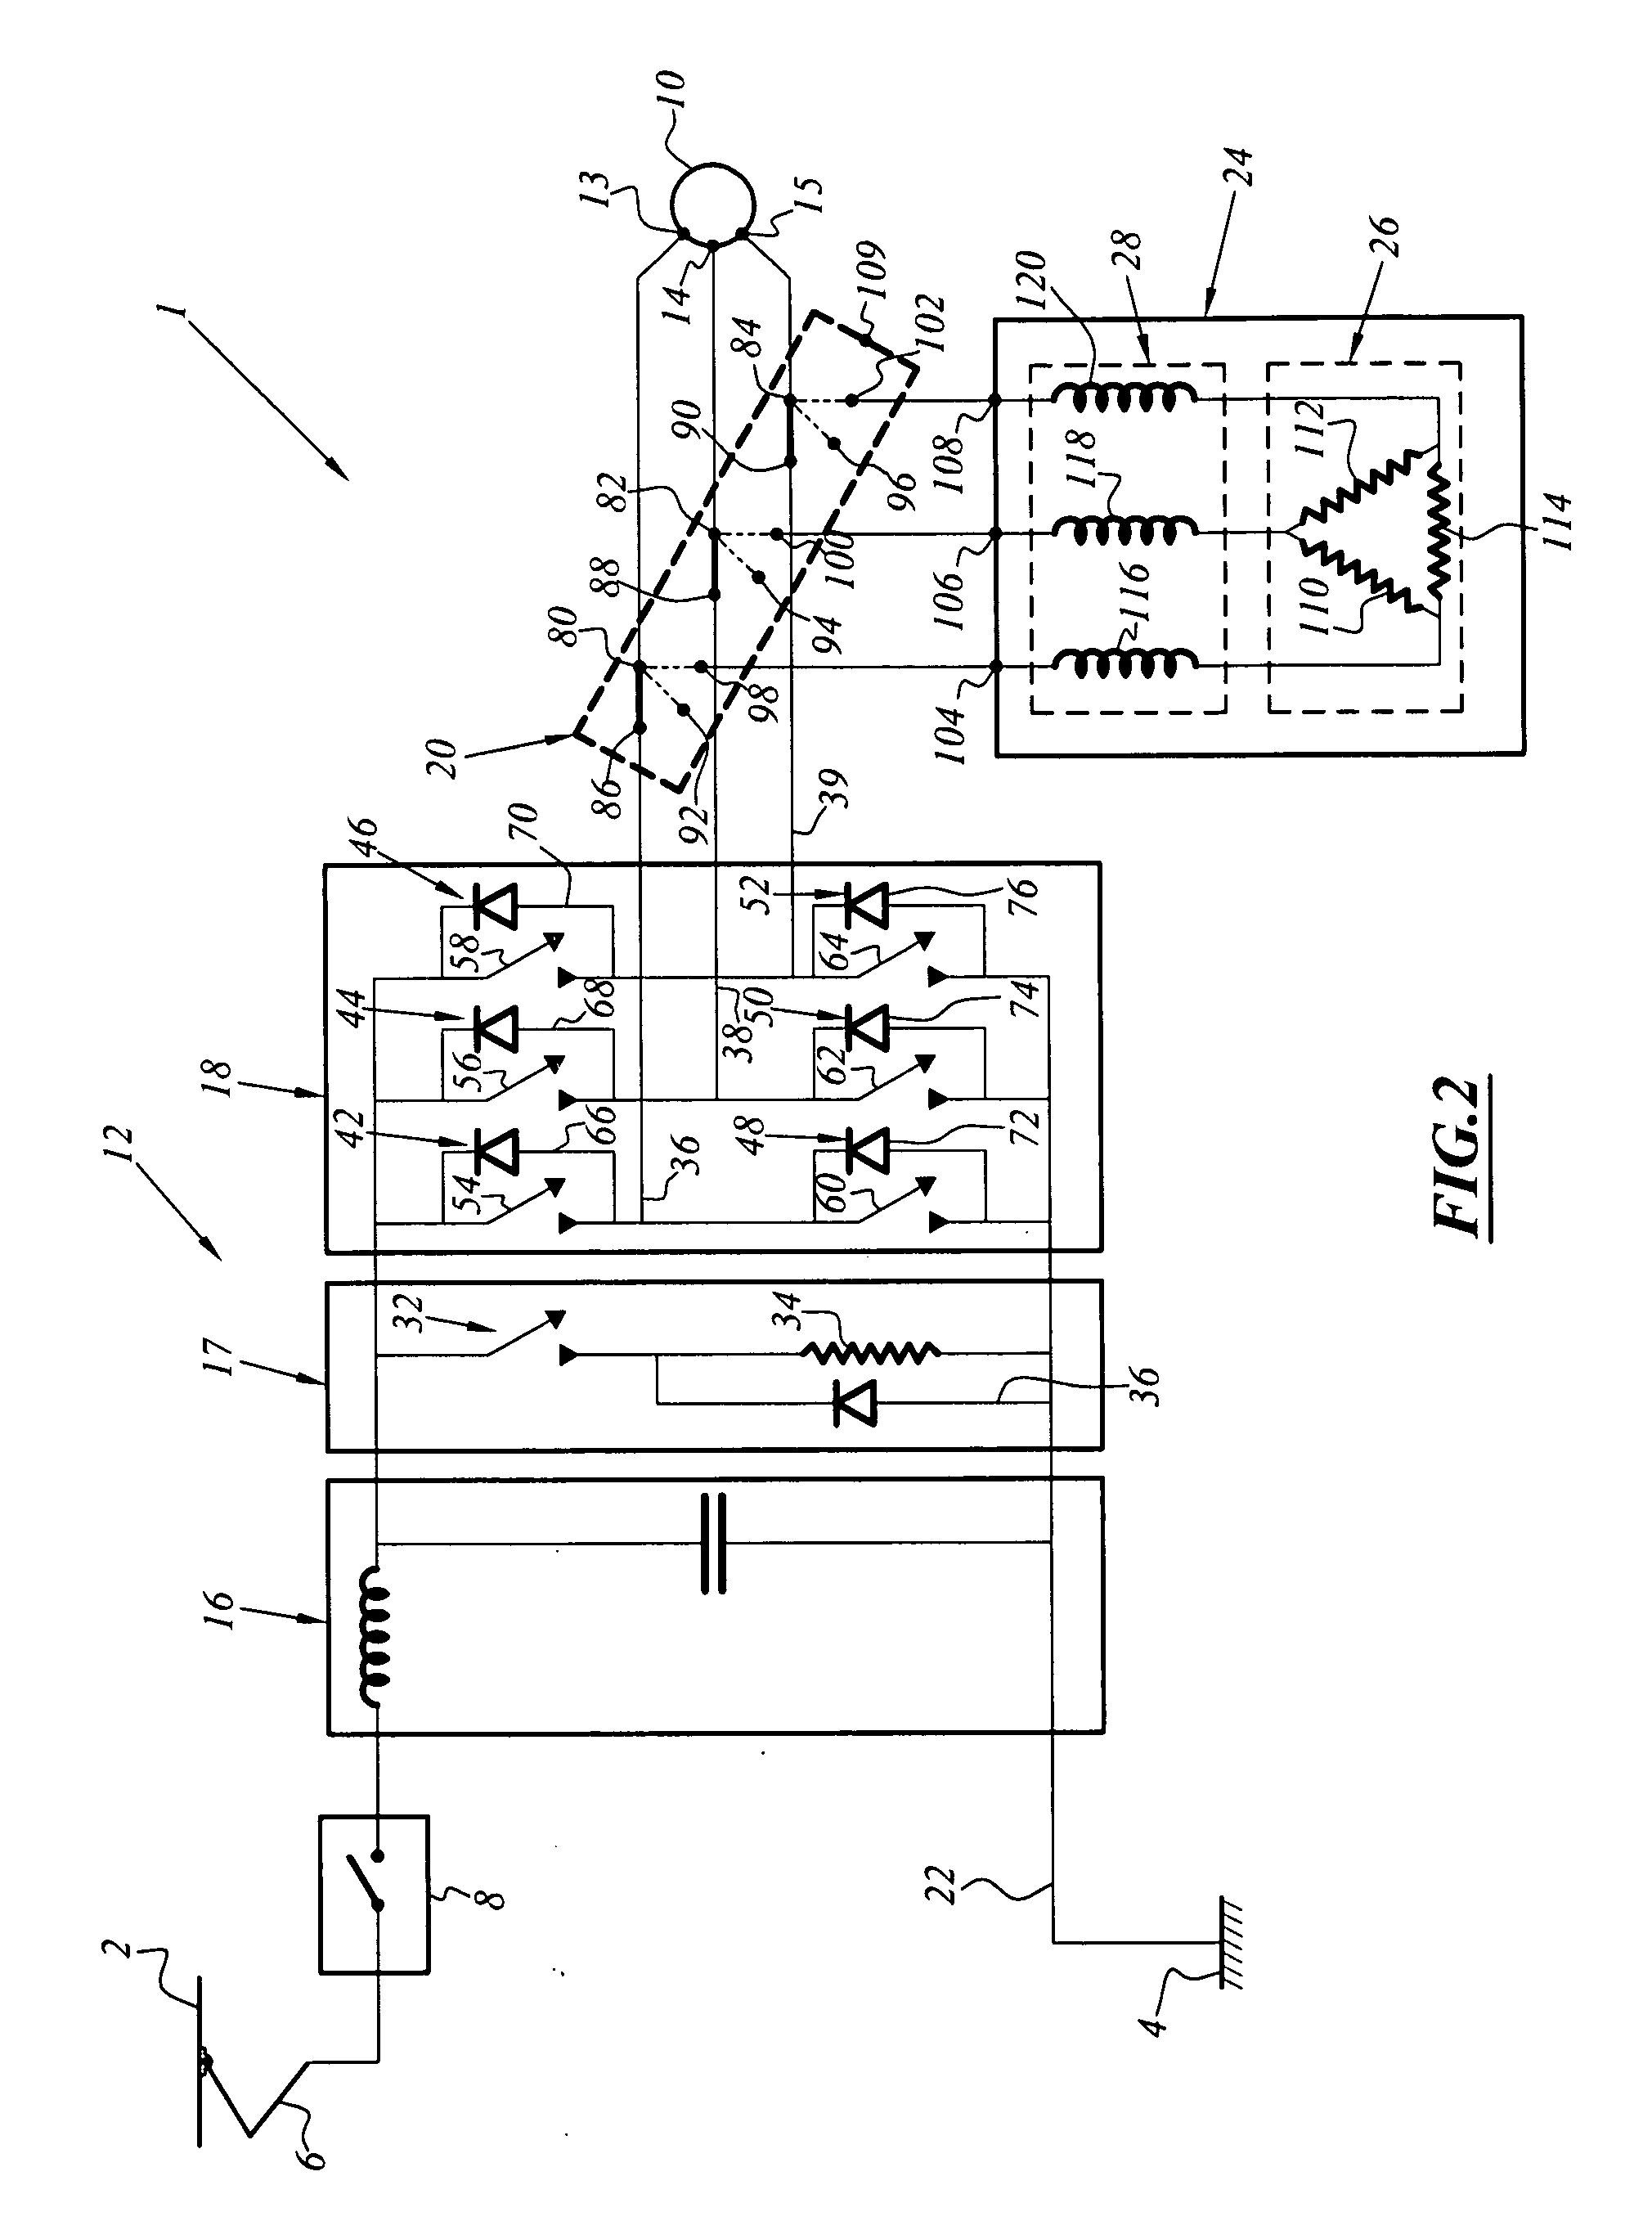 Electric safety braking device with permanent magnet motor and breaking torque control